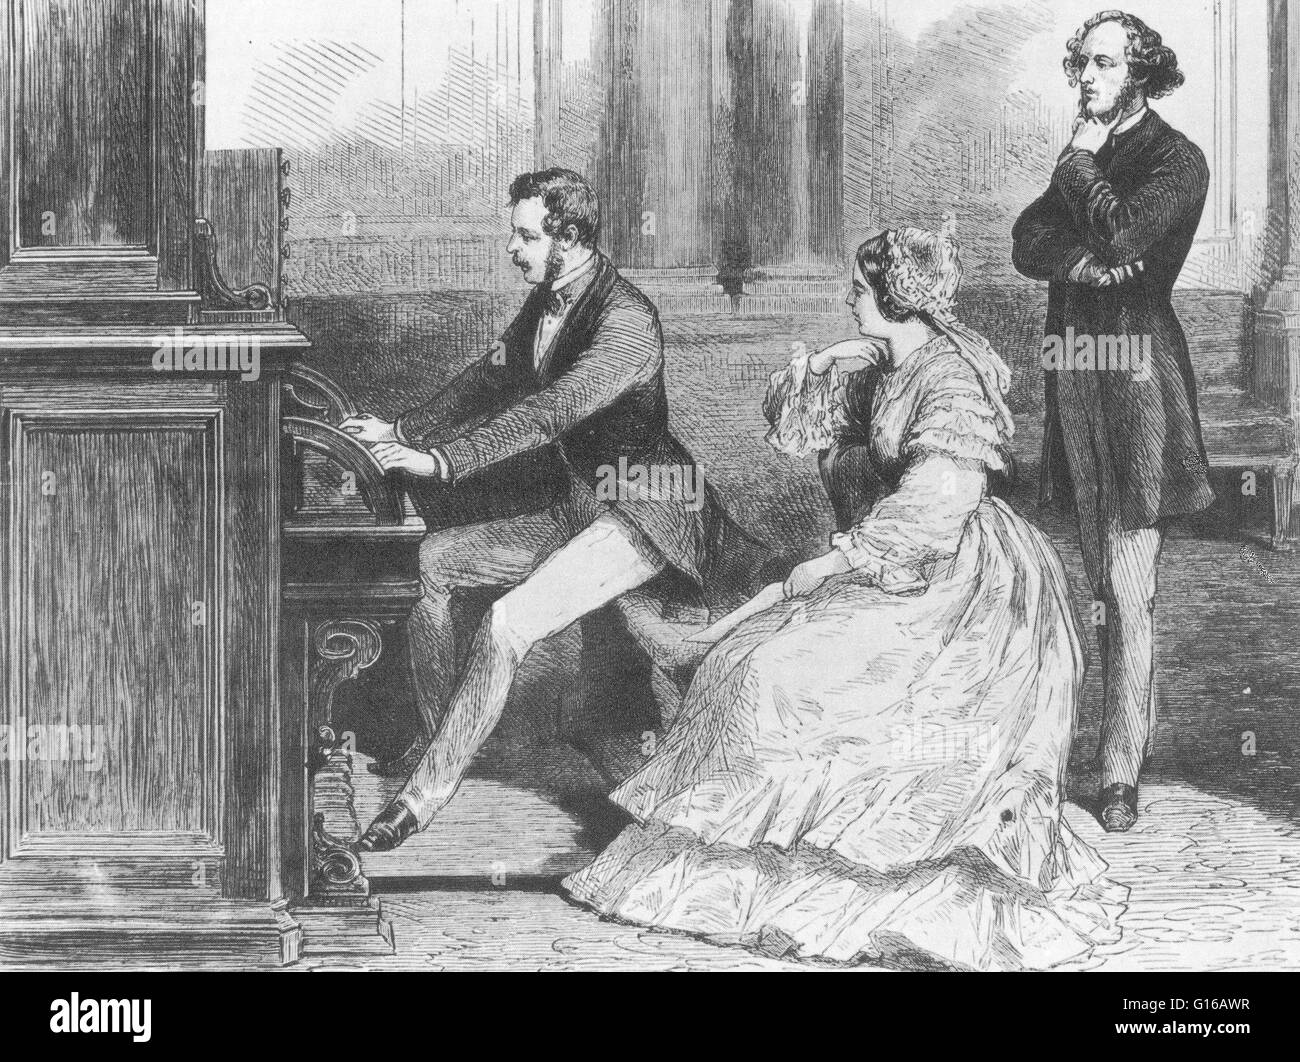 Engraving entitled: The Prince Consort (Albert) playing the organ before Mendelssohn while the Queen looks on, at Buckingham Place, 1842. Jakob Ludwig Felix Mendelssohn Bartholdy (February 3, 1809 - November 4, 1847) was a German composer, pianist, organi Stock Photo